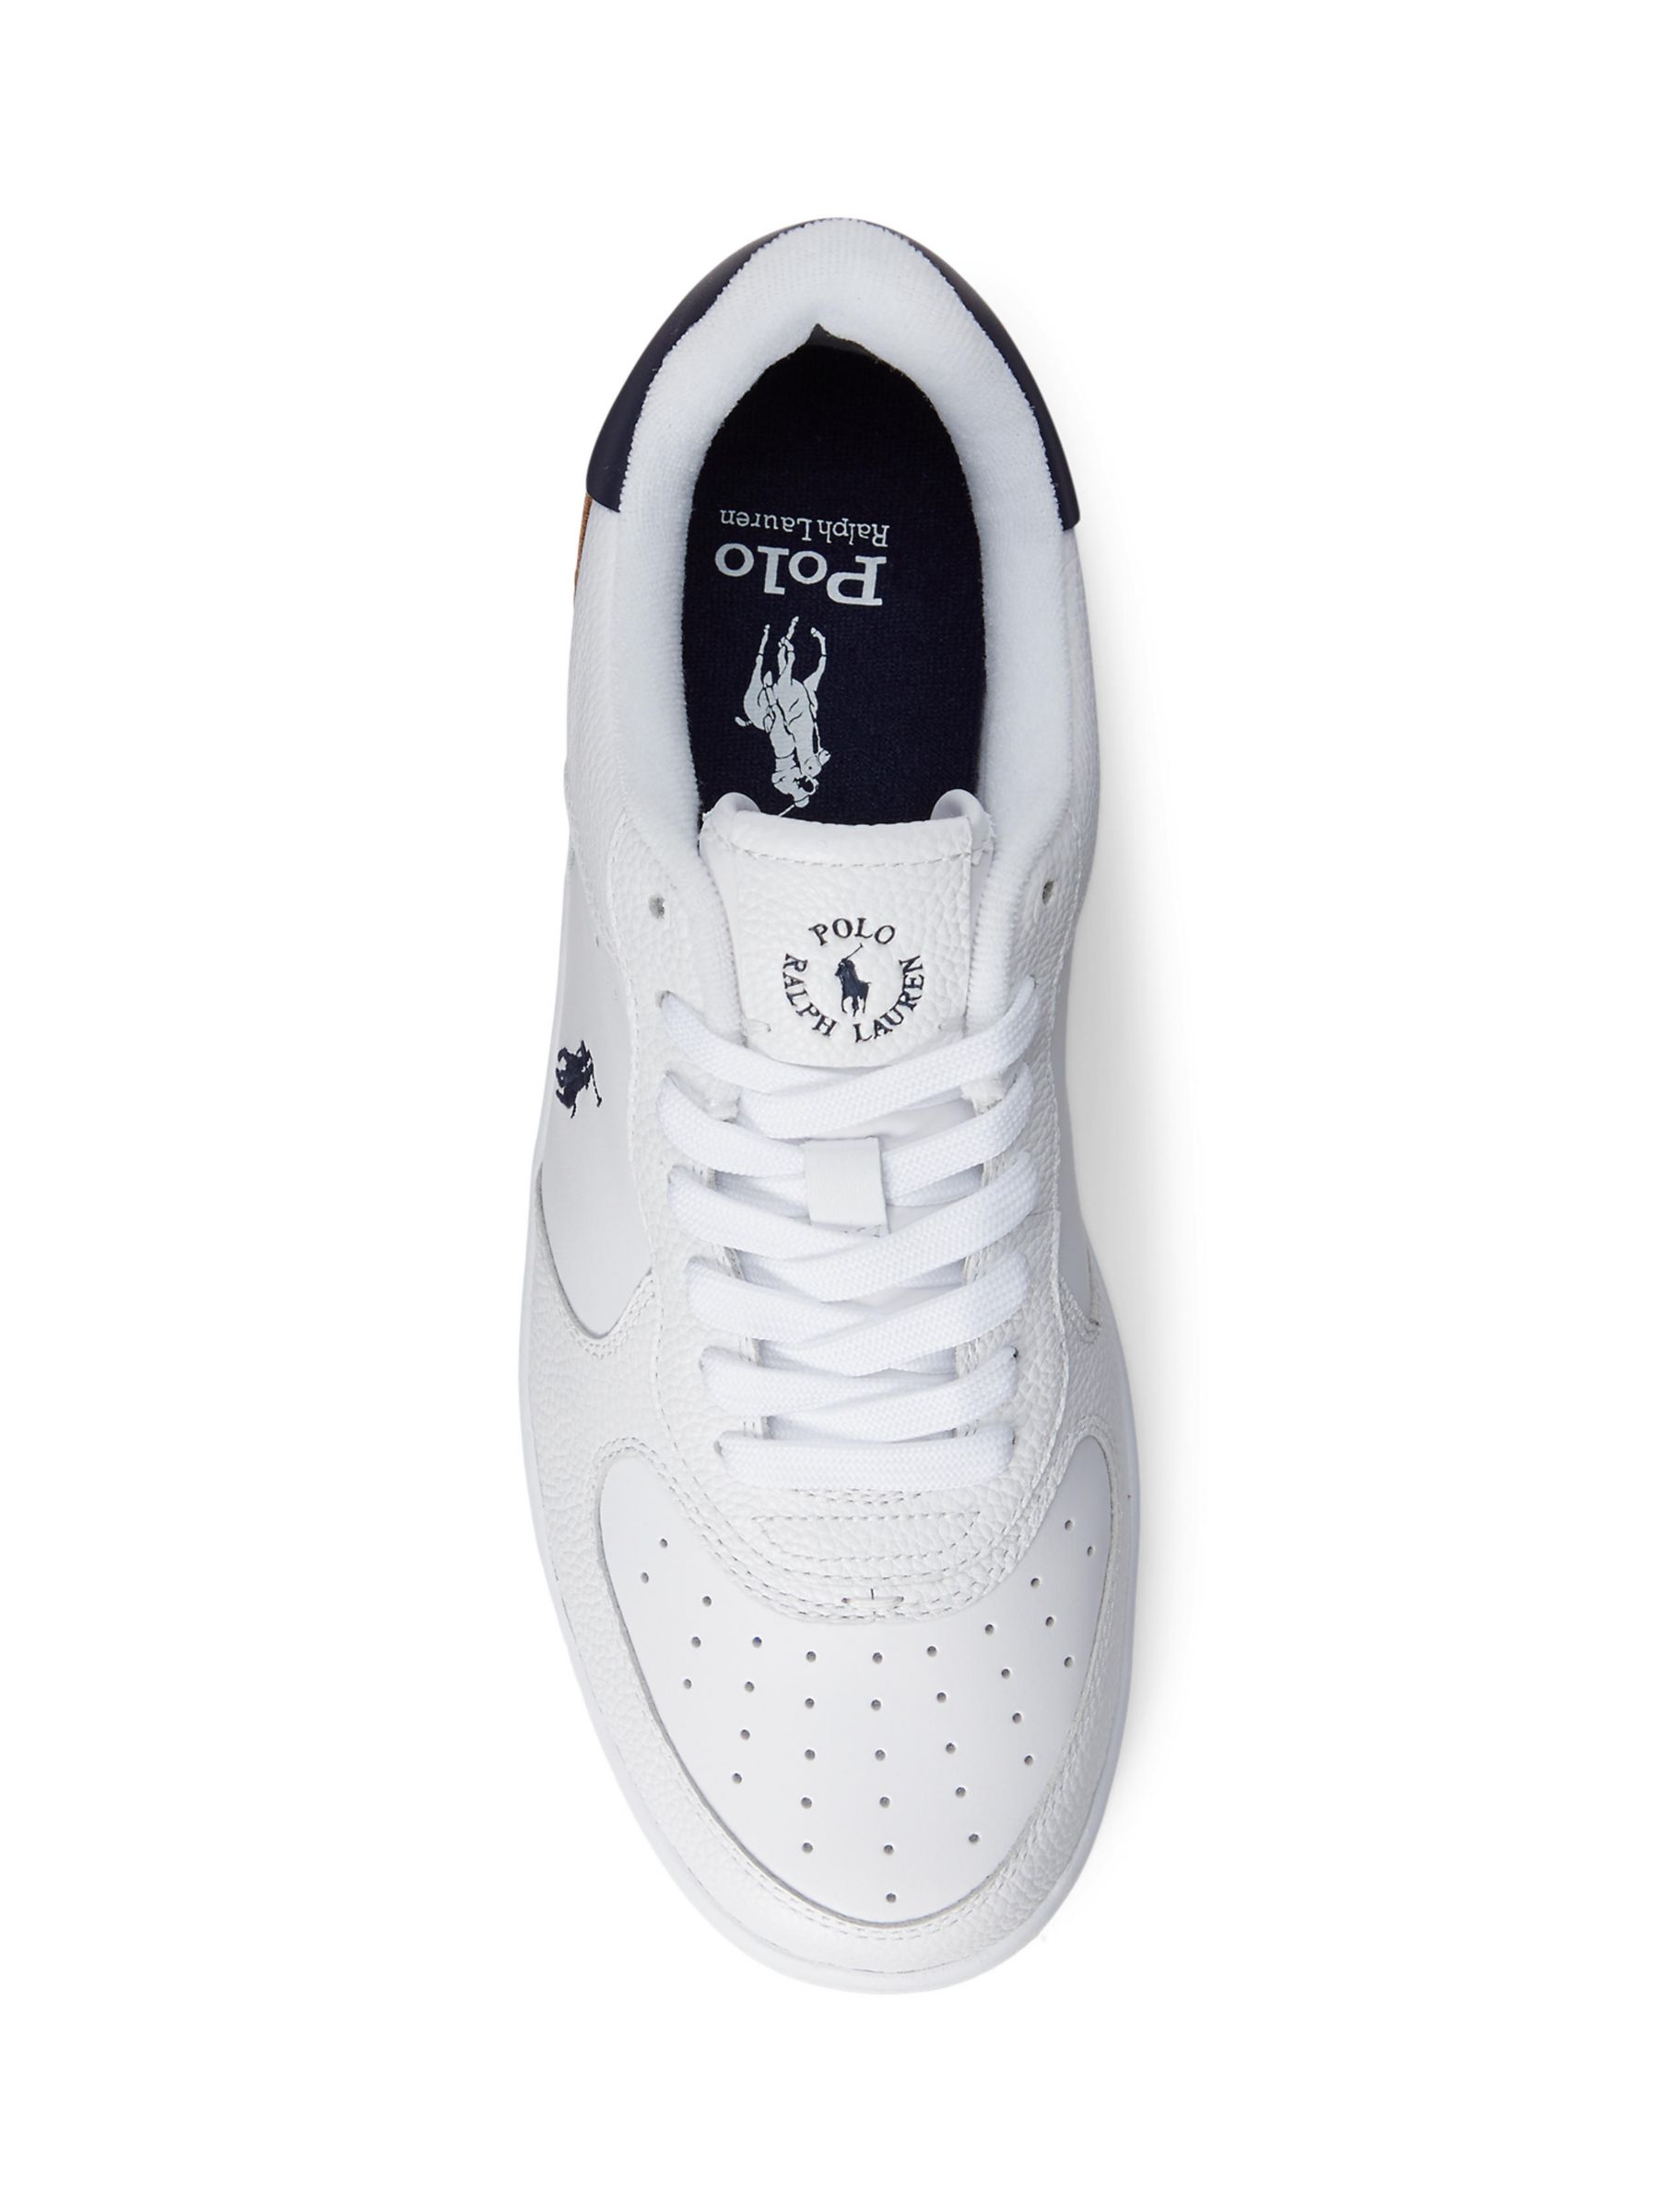 Buy Ralph Lauren Masters Court Leather Trainers Online at johnlewis.com